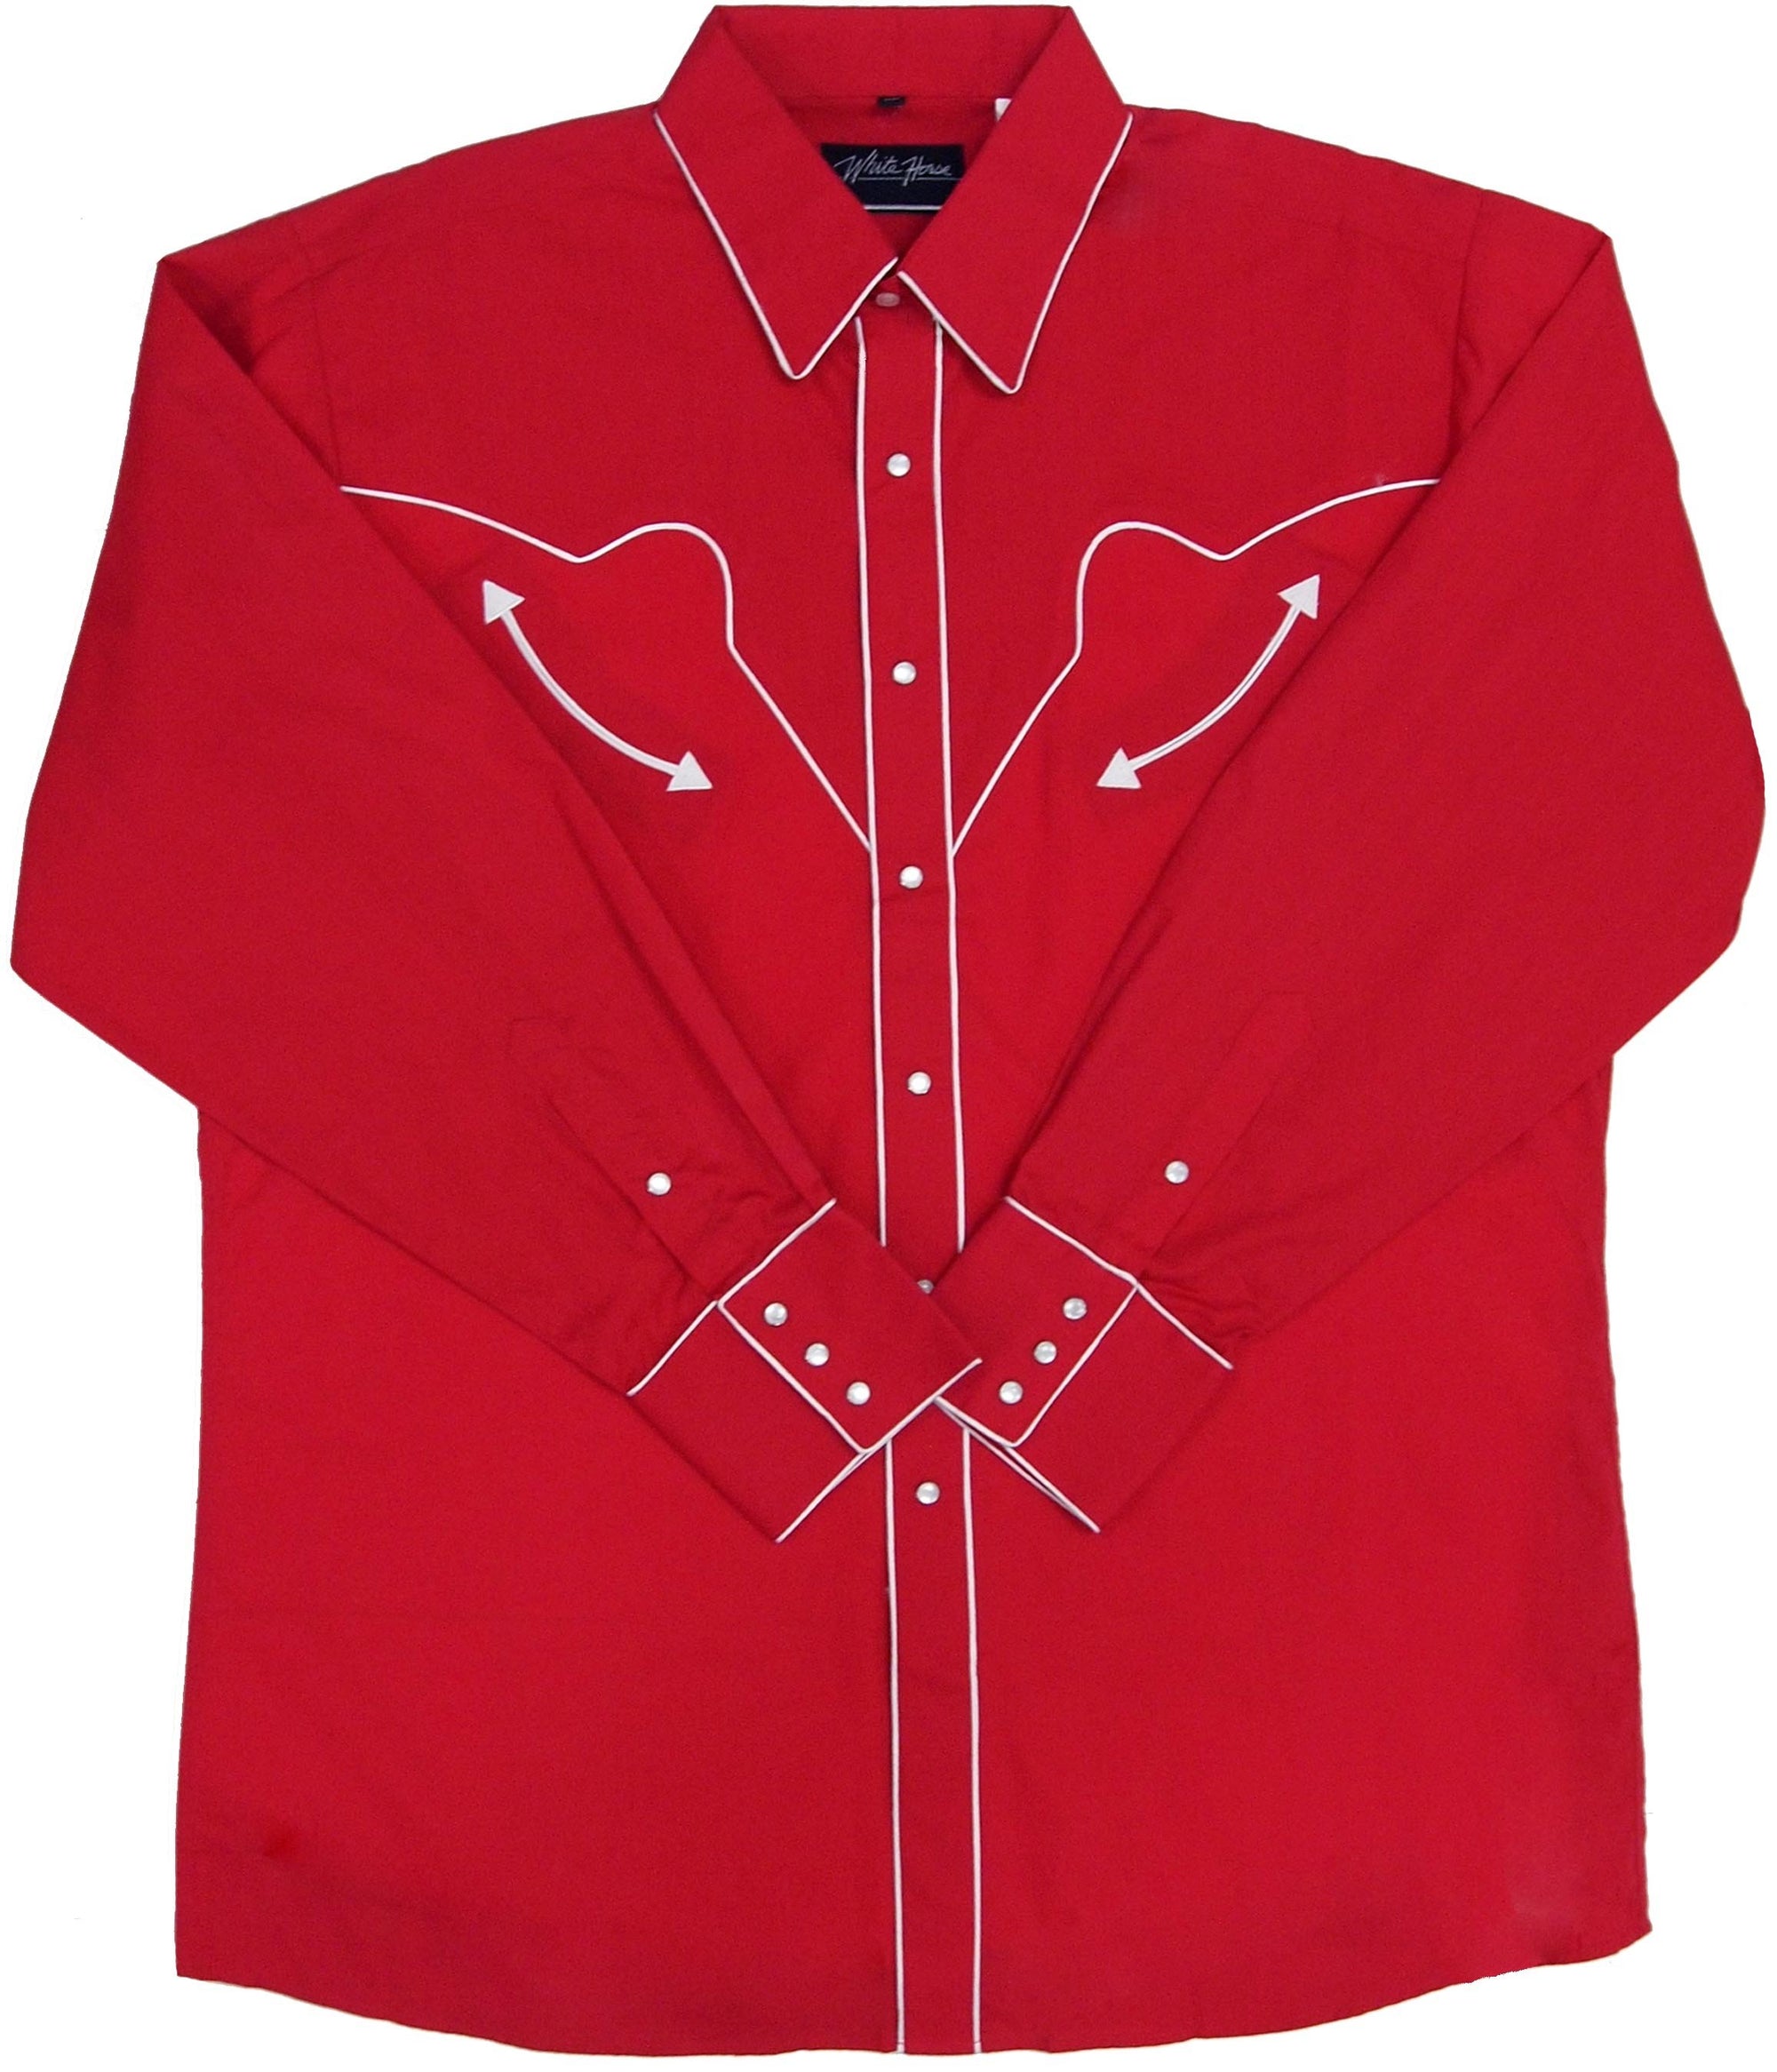 White Horse Apparel Men's Western Shirt Red with White Piping Front